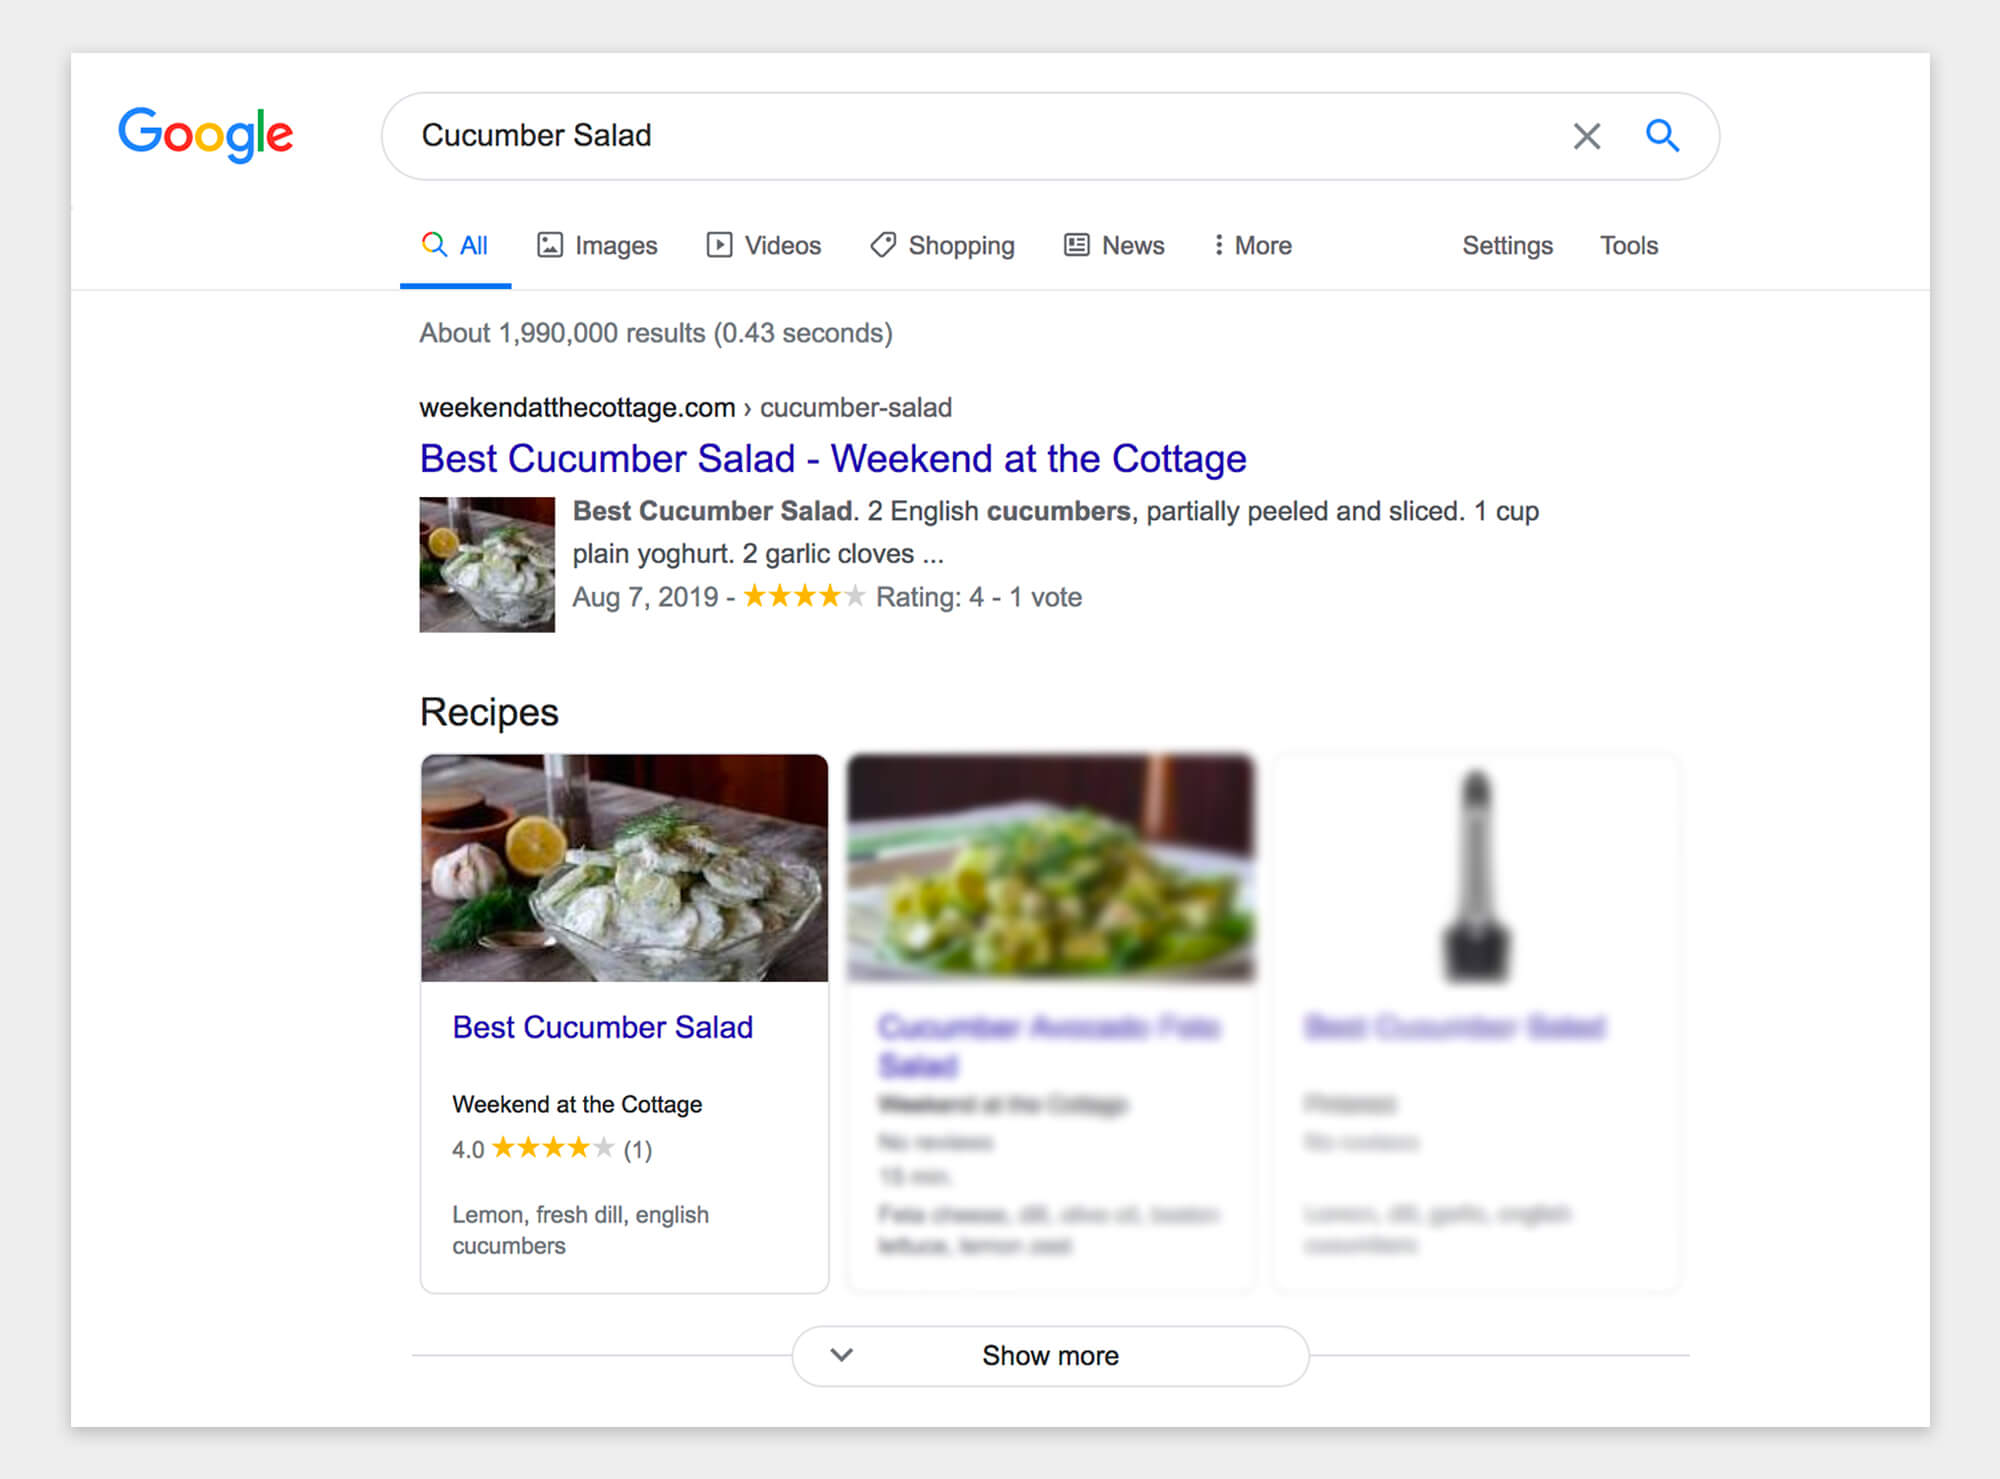 Website content search results displayed a "Recipe" post type.